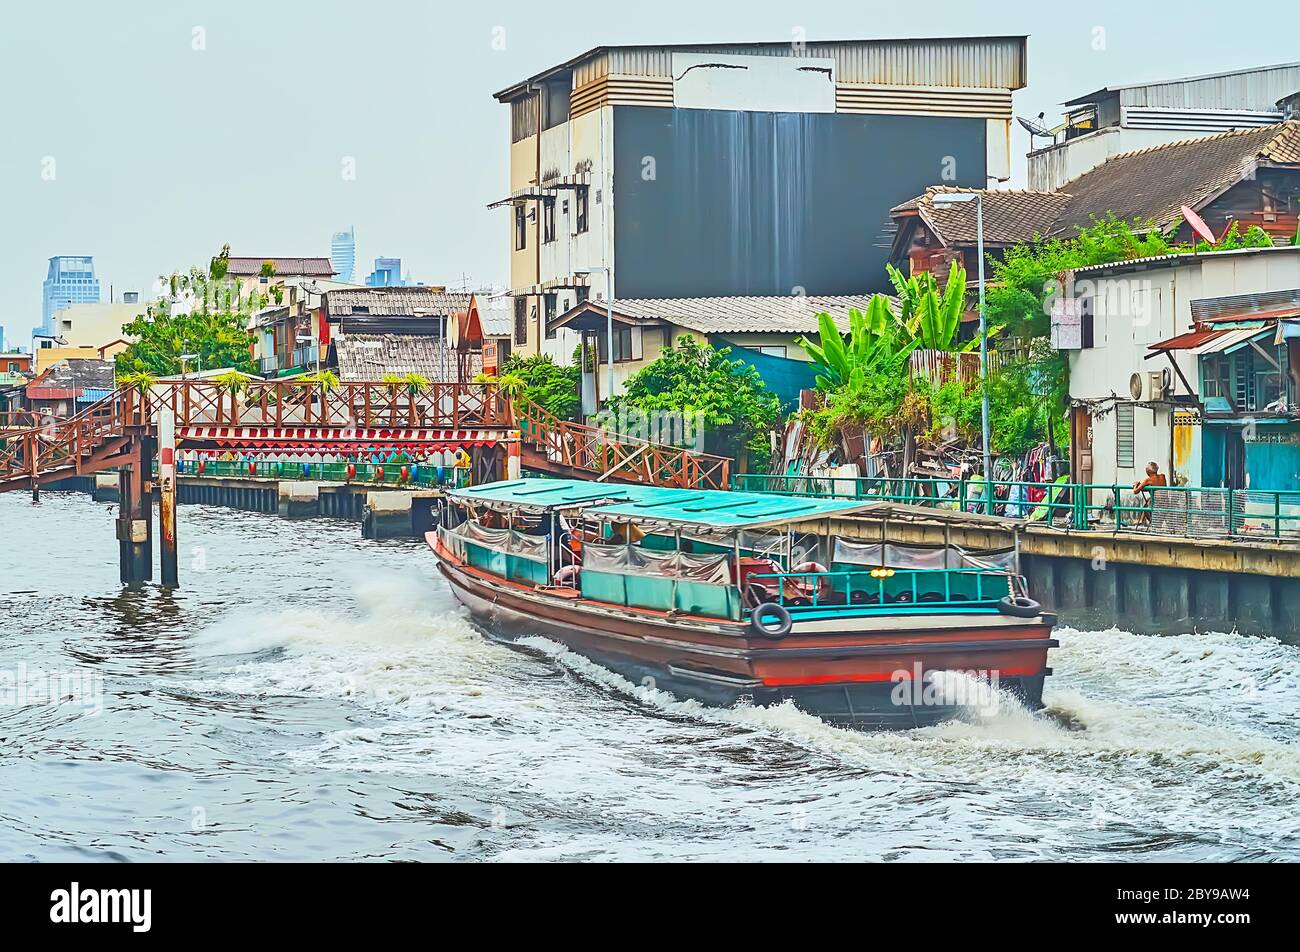 What Is It Like To Take A Canal Ride In Bangkok, Thailand?, 44% OFF